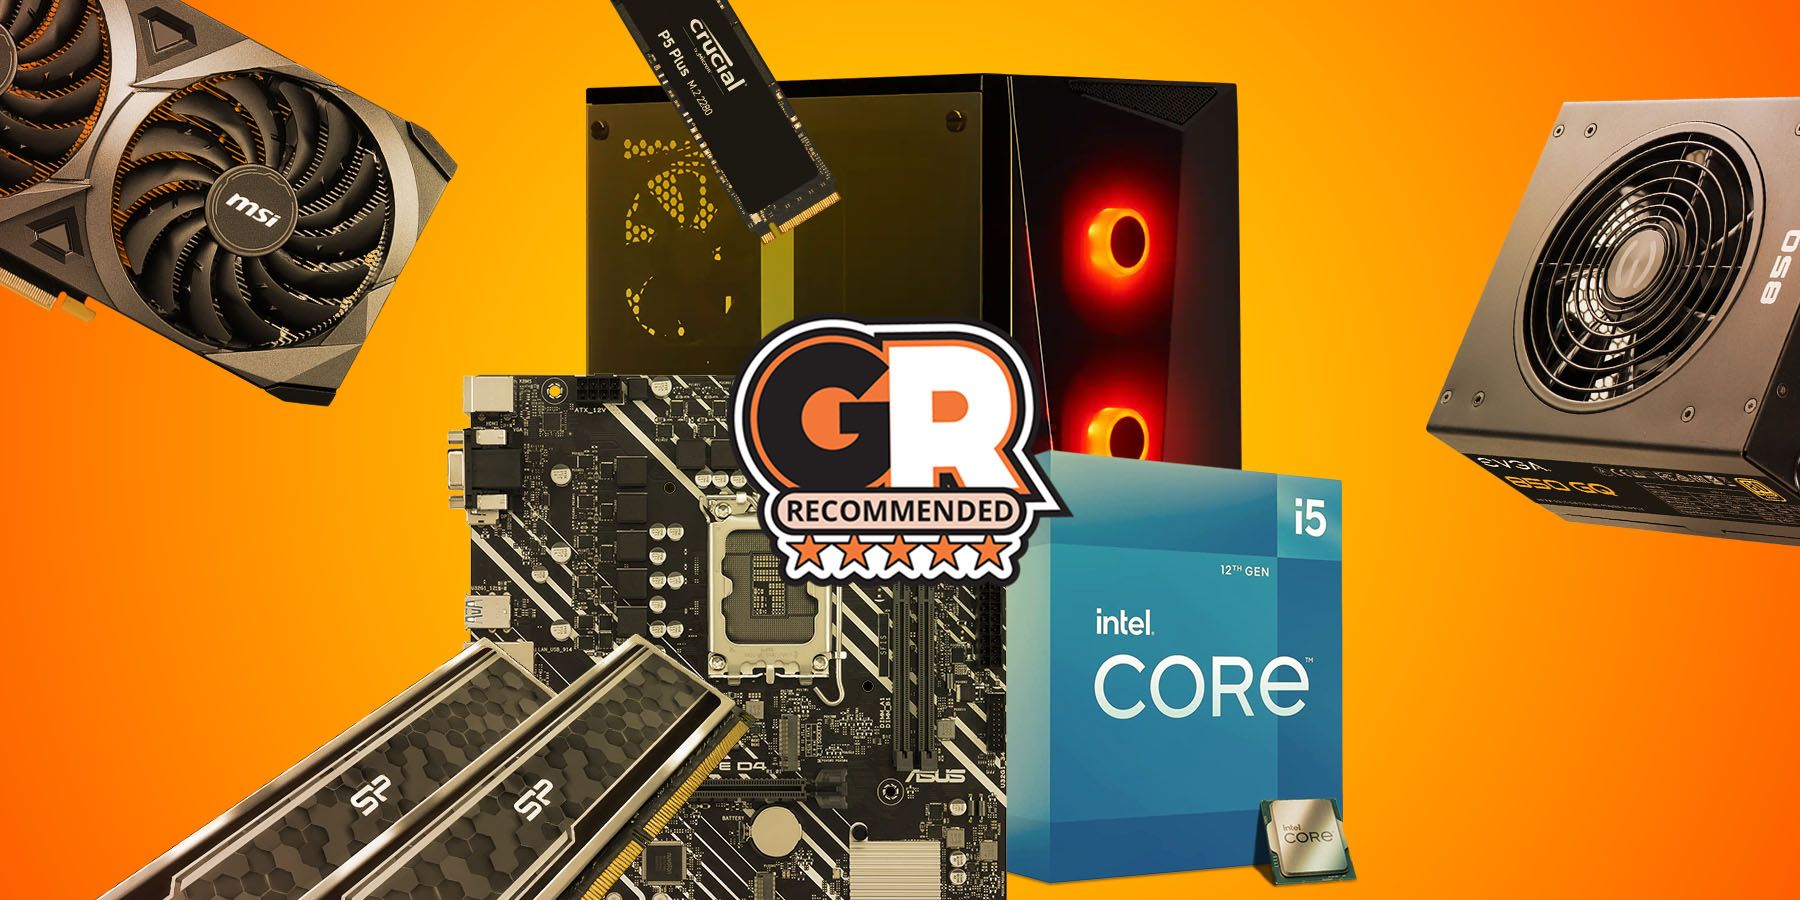 This CREATOR motherboard can cost you LESS than $1* 😱